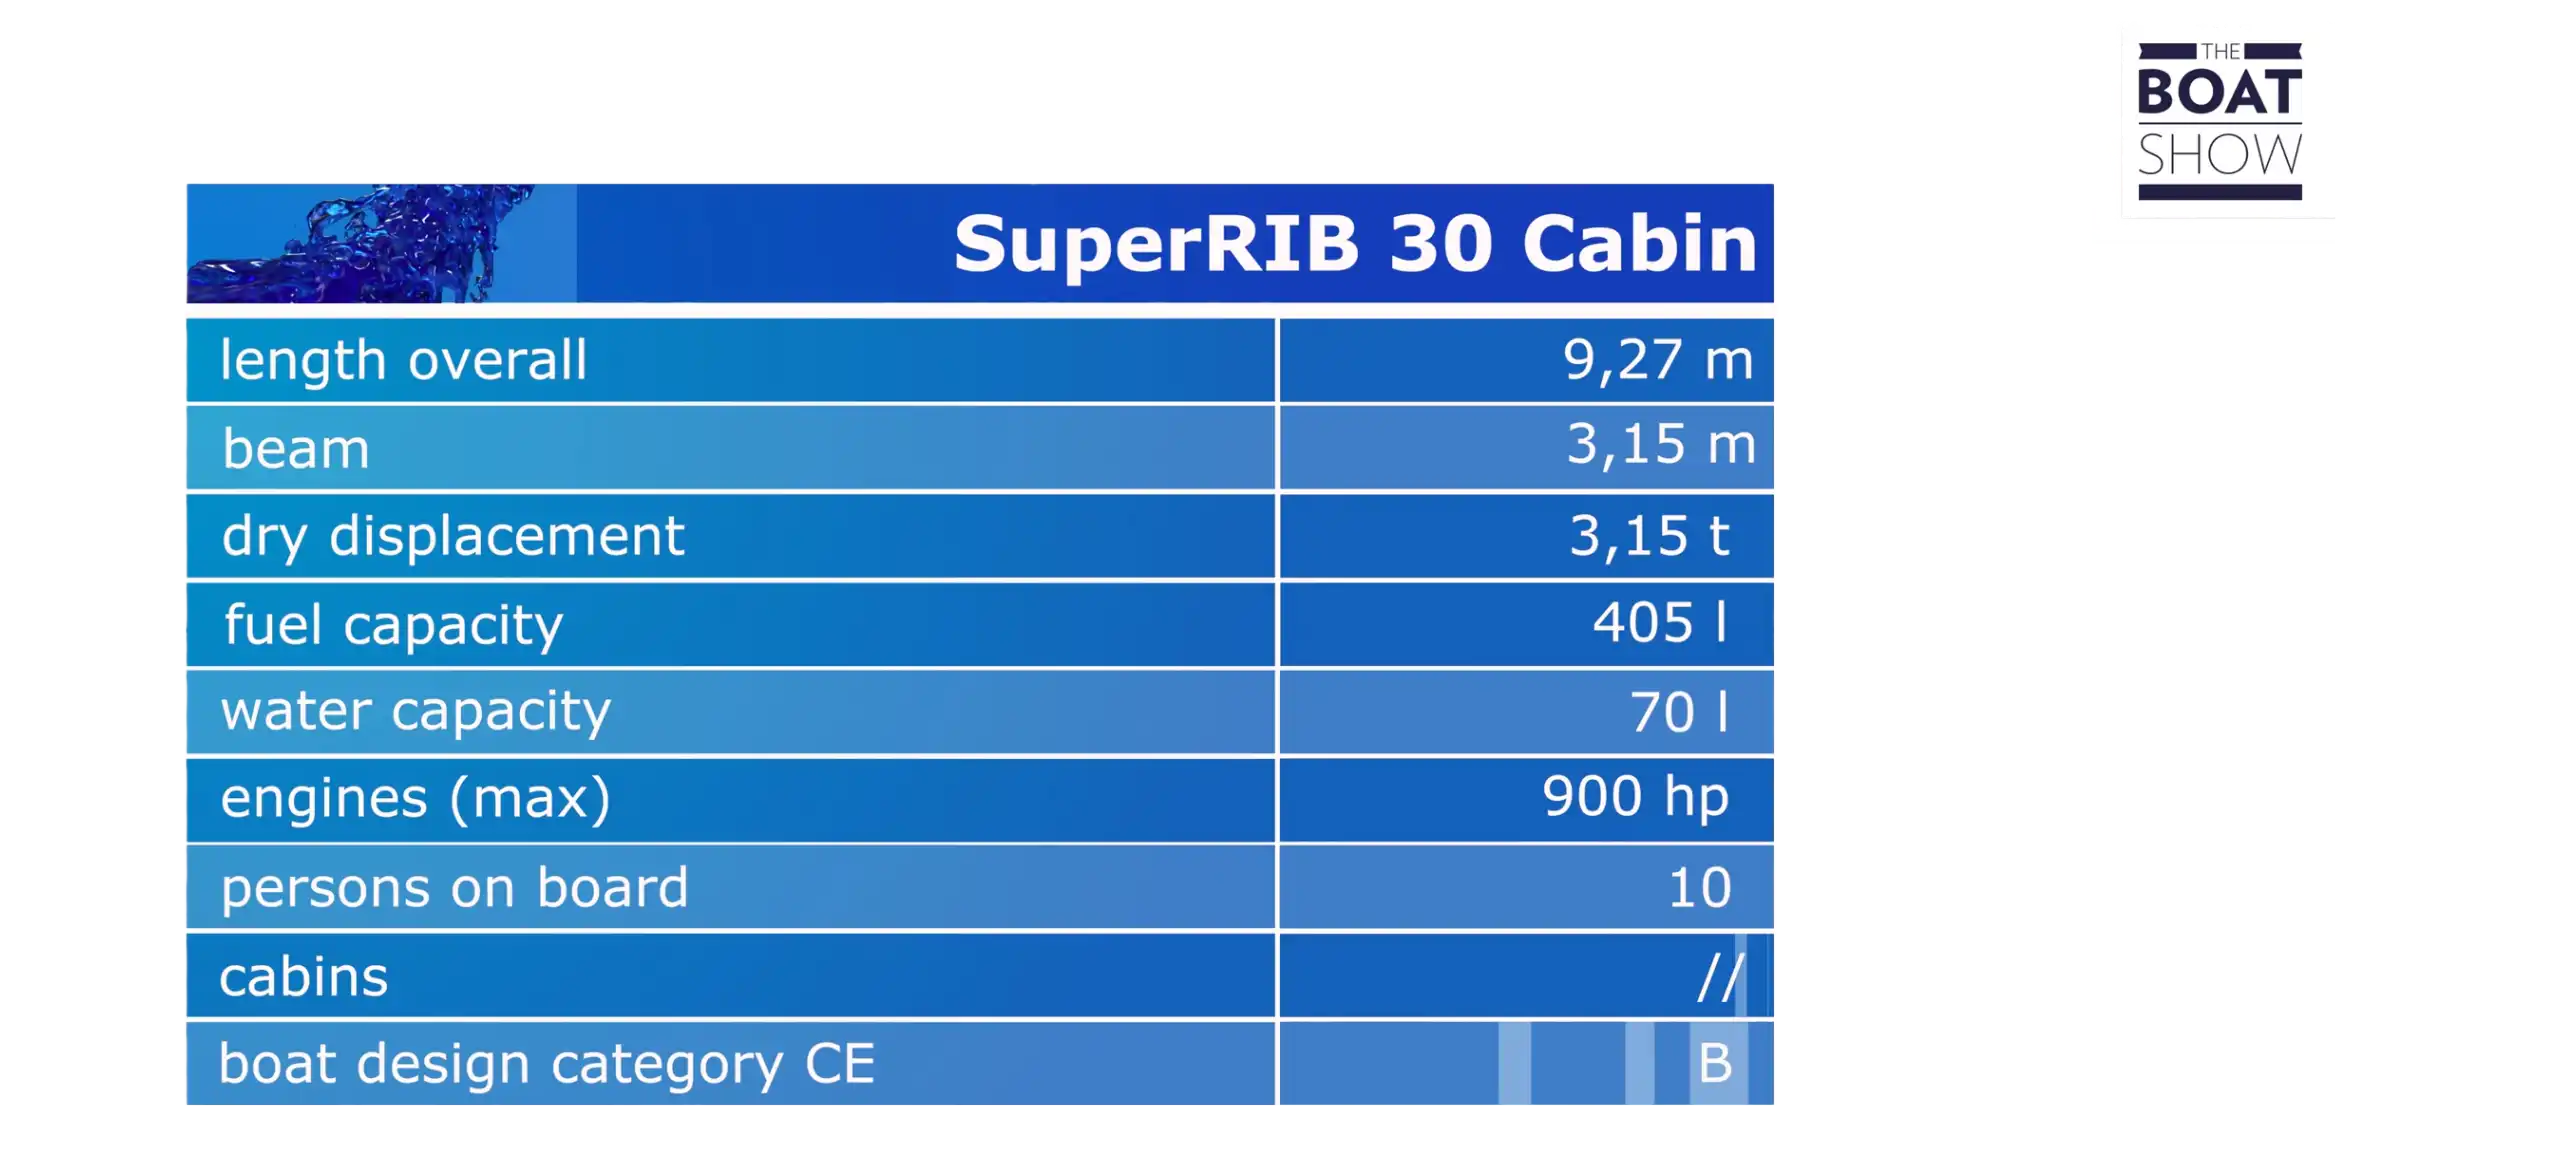 superRIB 30 cabin specs @ RIBs ONLY - Home of the Rigid Inflatable Boat